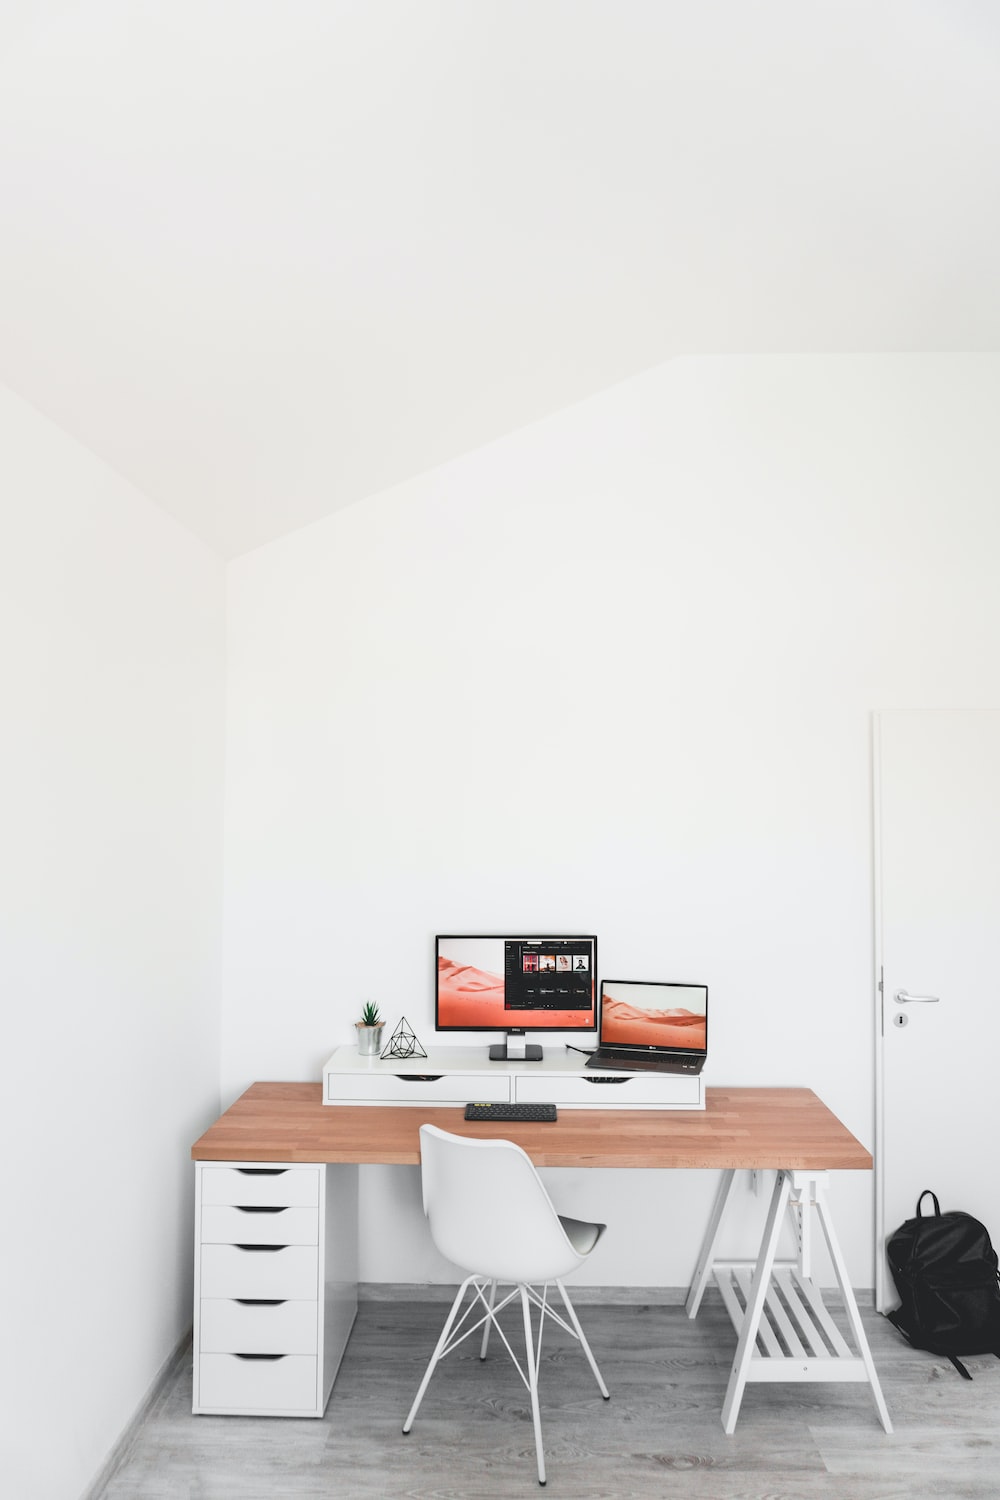 Should your office be in your bedroom?